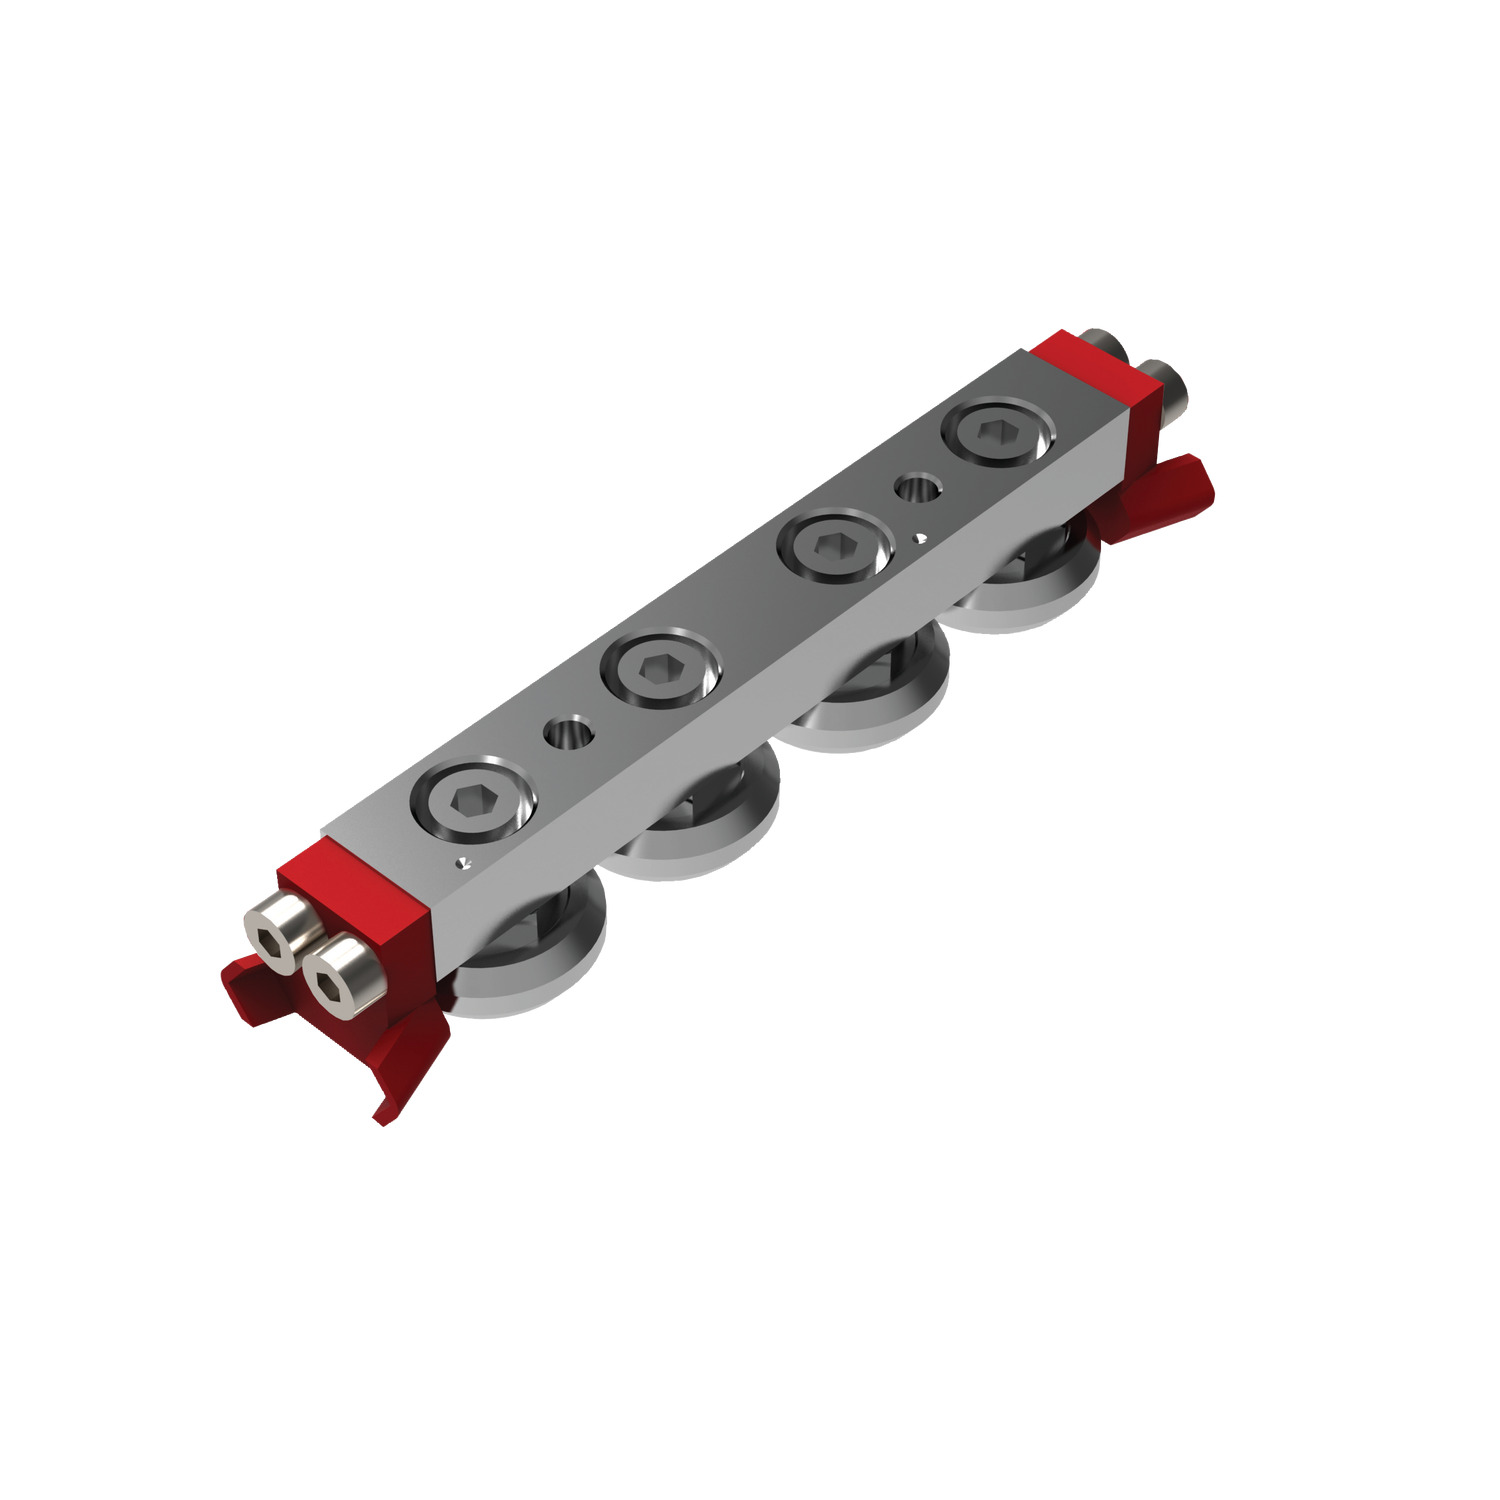 Medium Duty Sliders - Size 28 Medium duty, compact rail sliders. Front fixing with no side seal.